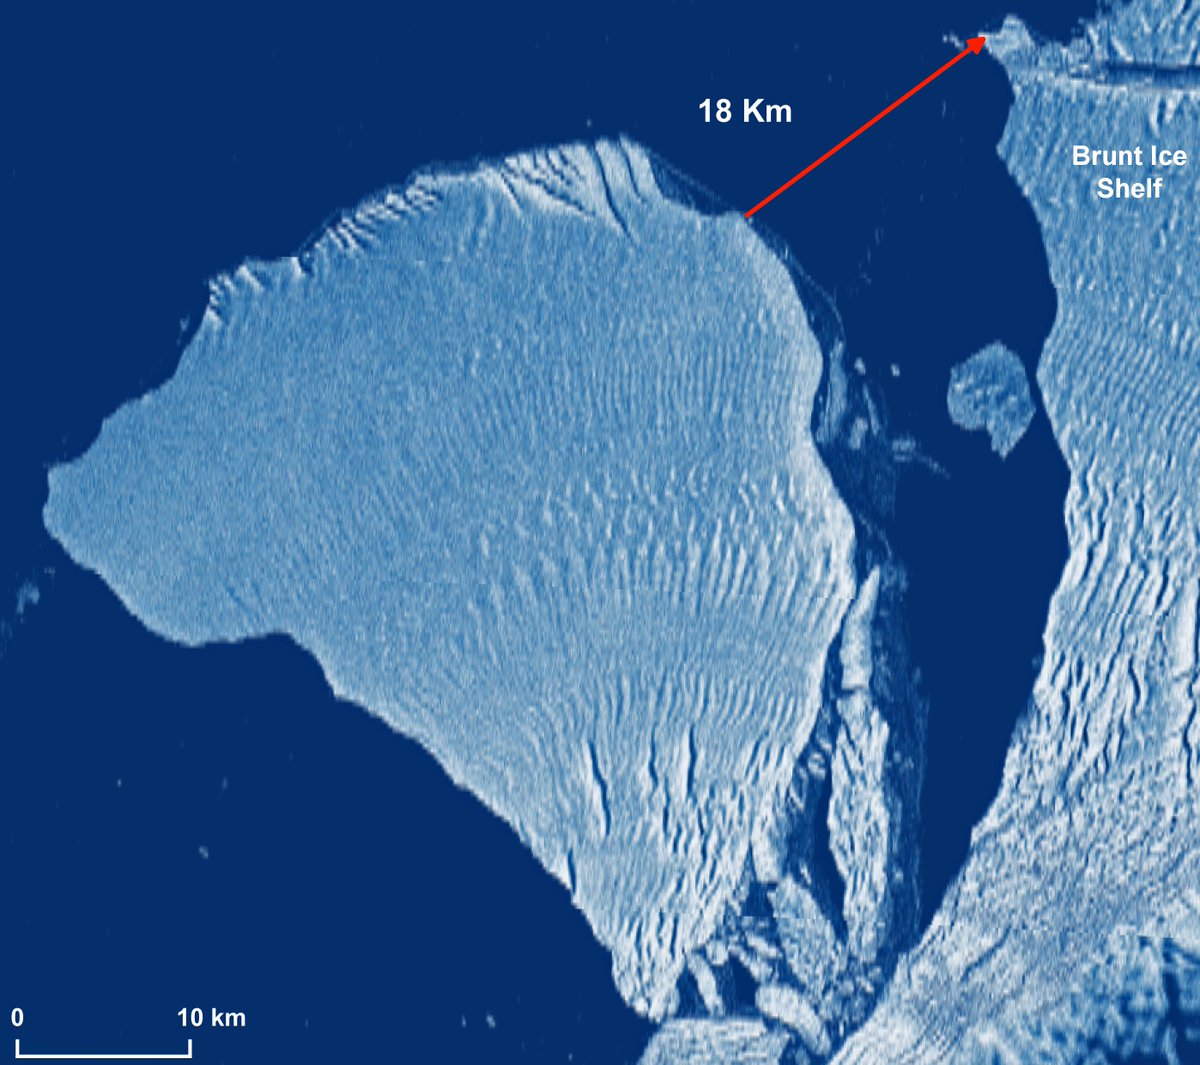 🔴🧊🔵#A81 has increased again its distance from #BruntIceShelf:in the latest #Sentinel1 image of Jan.31 the maximum distance is now 18Km and the #iceberg is still moving away.#Antarctica #SAR #GoldenAgeOfSar #ClimateEmergency @ai6yrham @StormHour @Off_Valpo @aemet_antartida